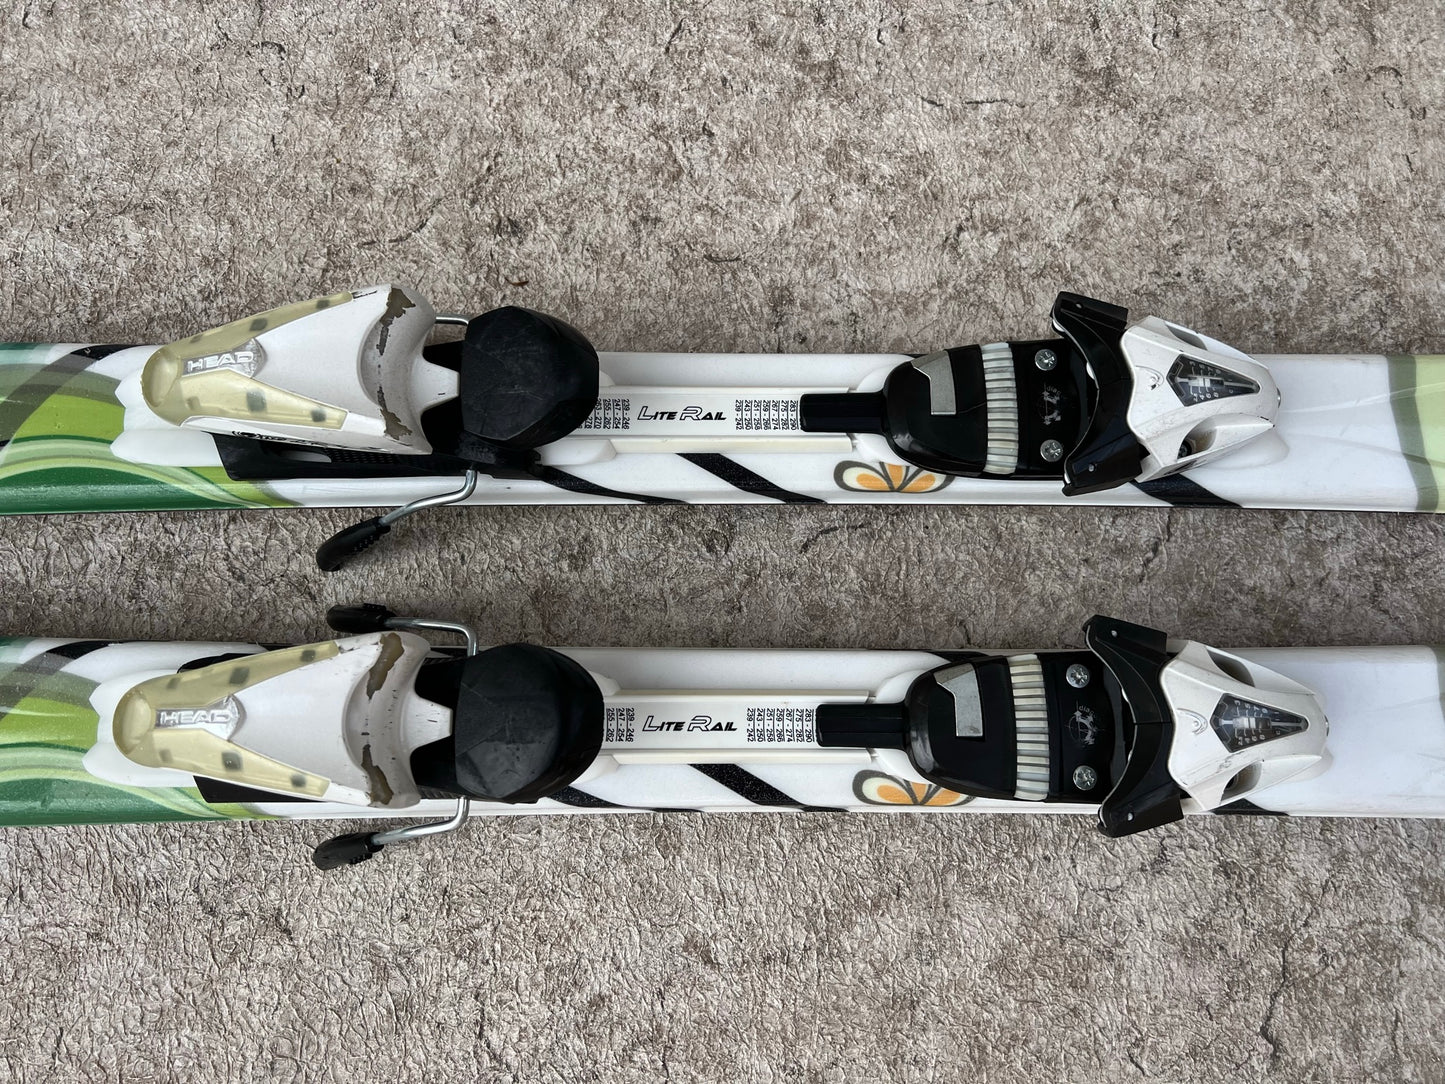 Ski 149 Head First One Sage White Grey Parabolic With Bindings Needs Waxing